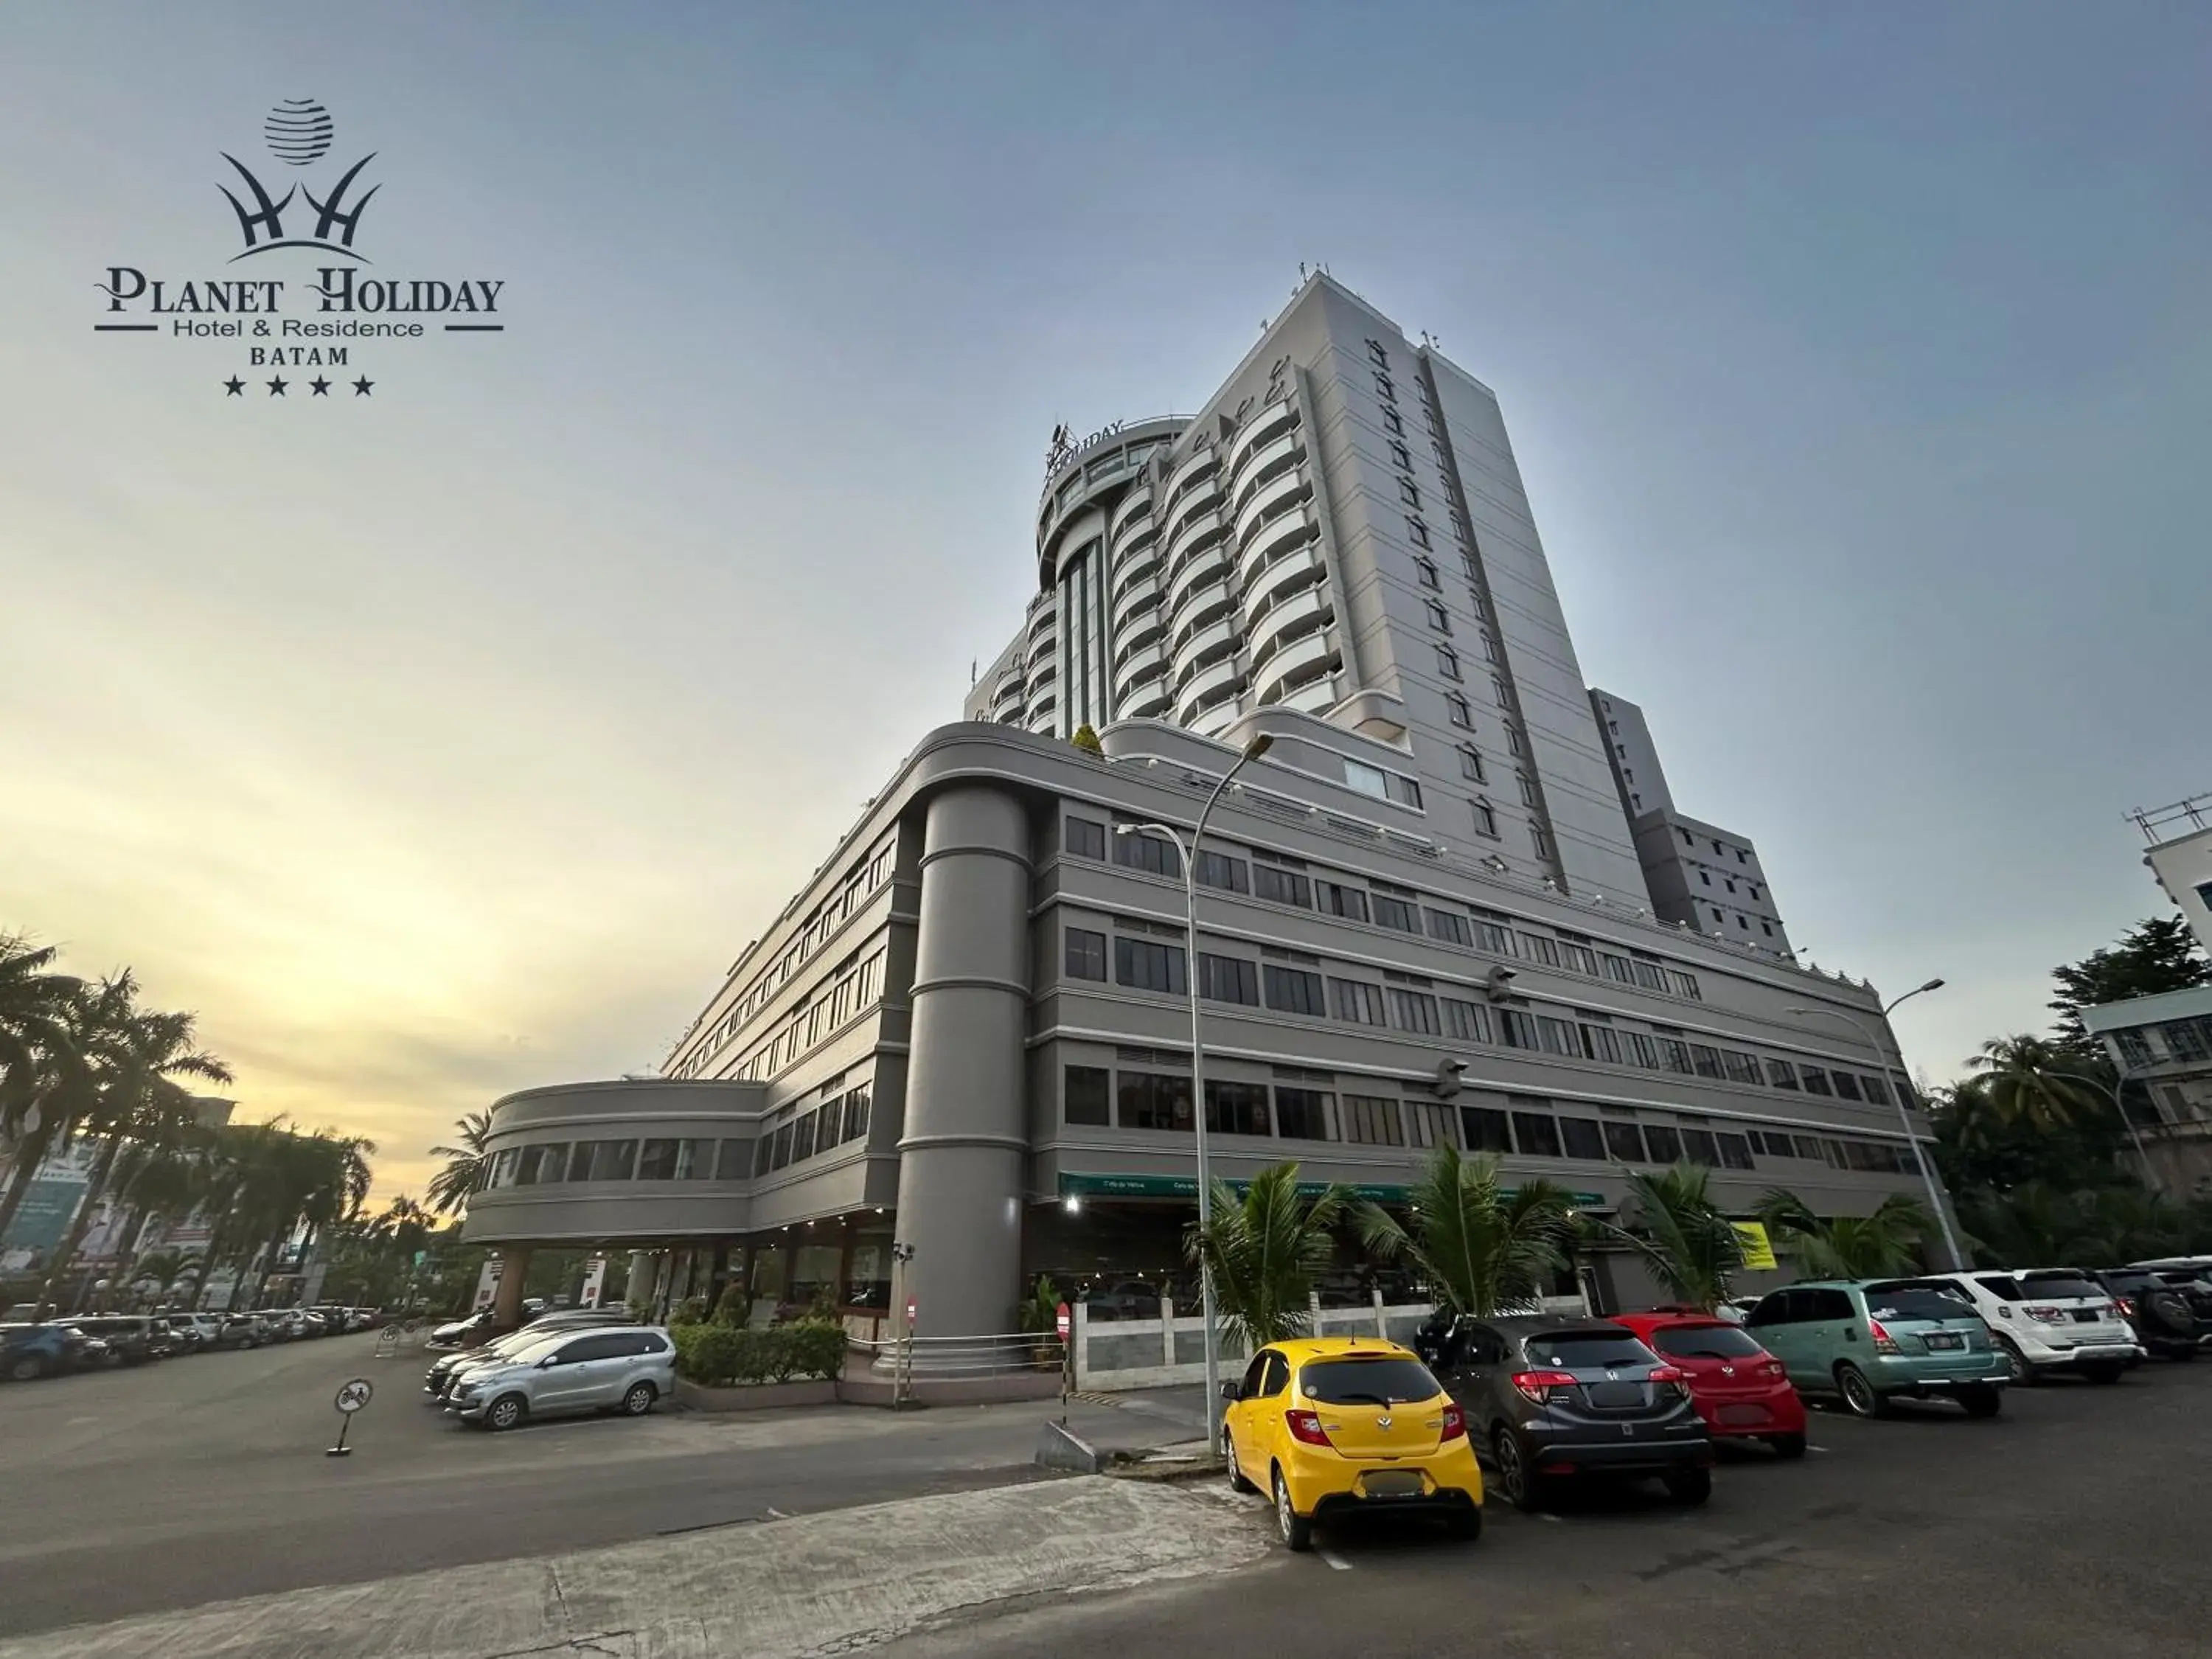 Property Building in Planet Holiday Hotel & Residence